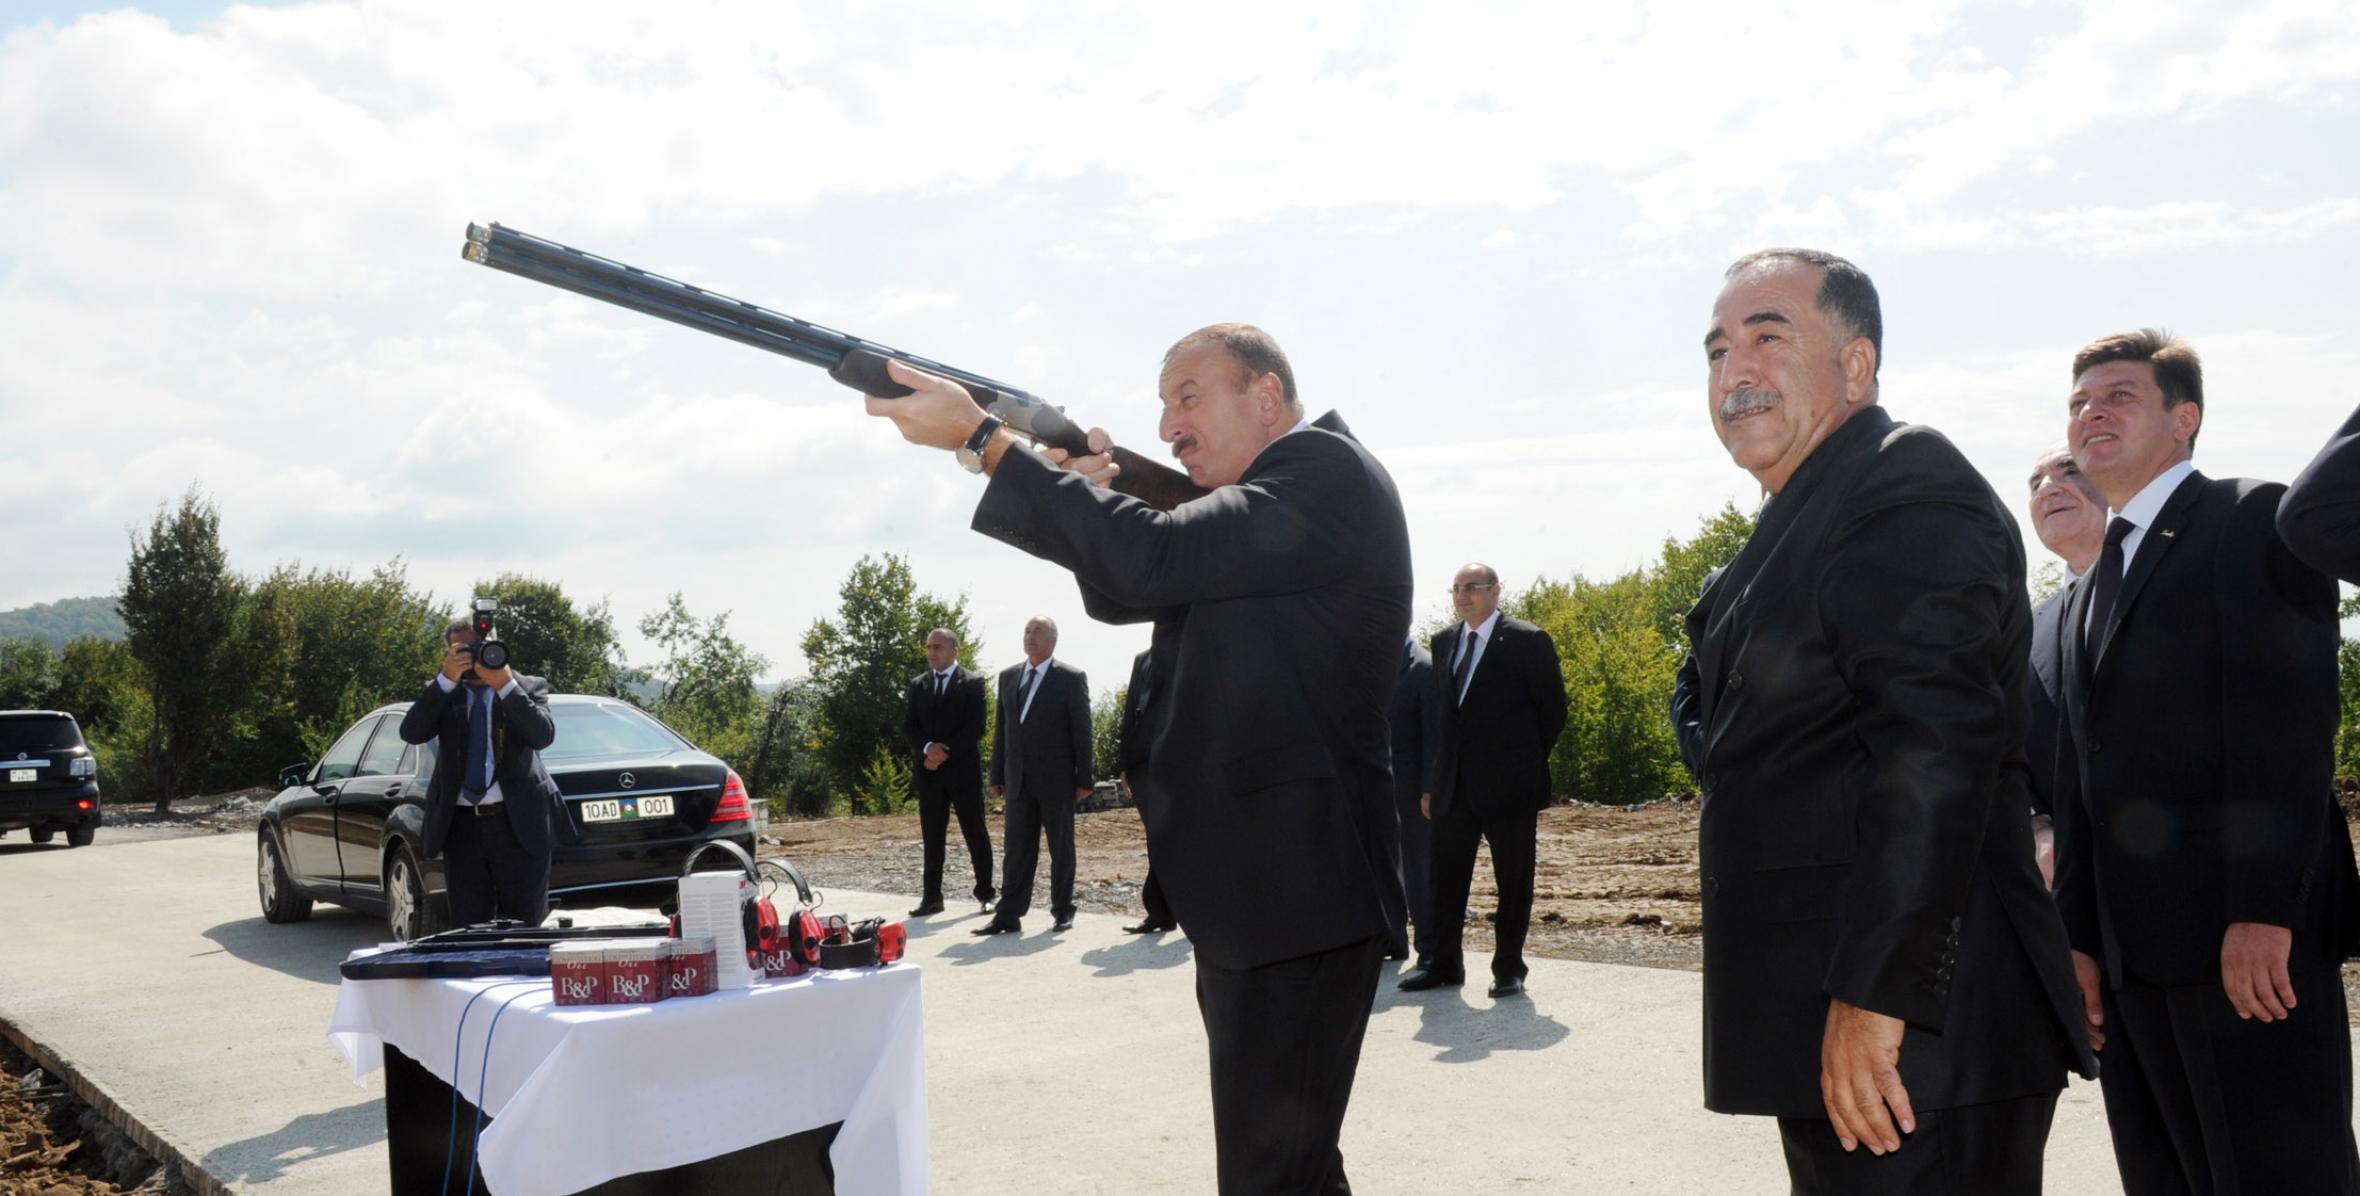 Ilham Aliyev reviewed progress of construction of a trap shooting and archery center in Gabala